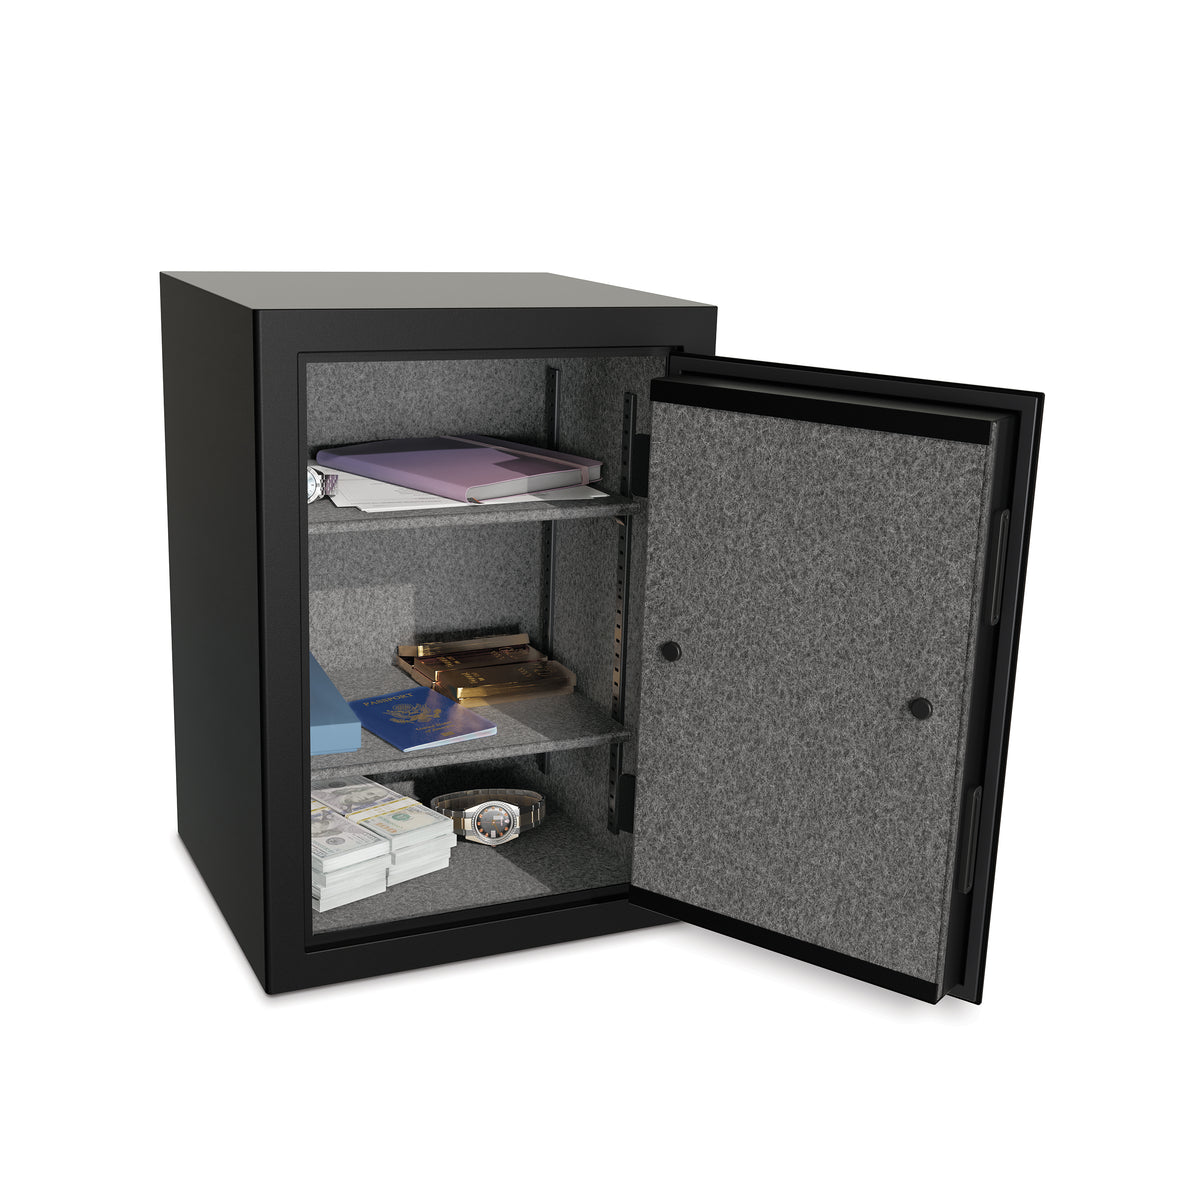 Sports Afield SA-ONYX3 Home &amp; Office Fireproof Safe Door Open Full